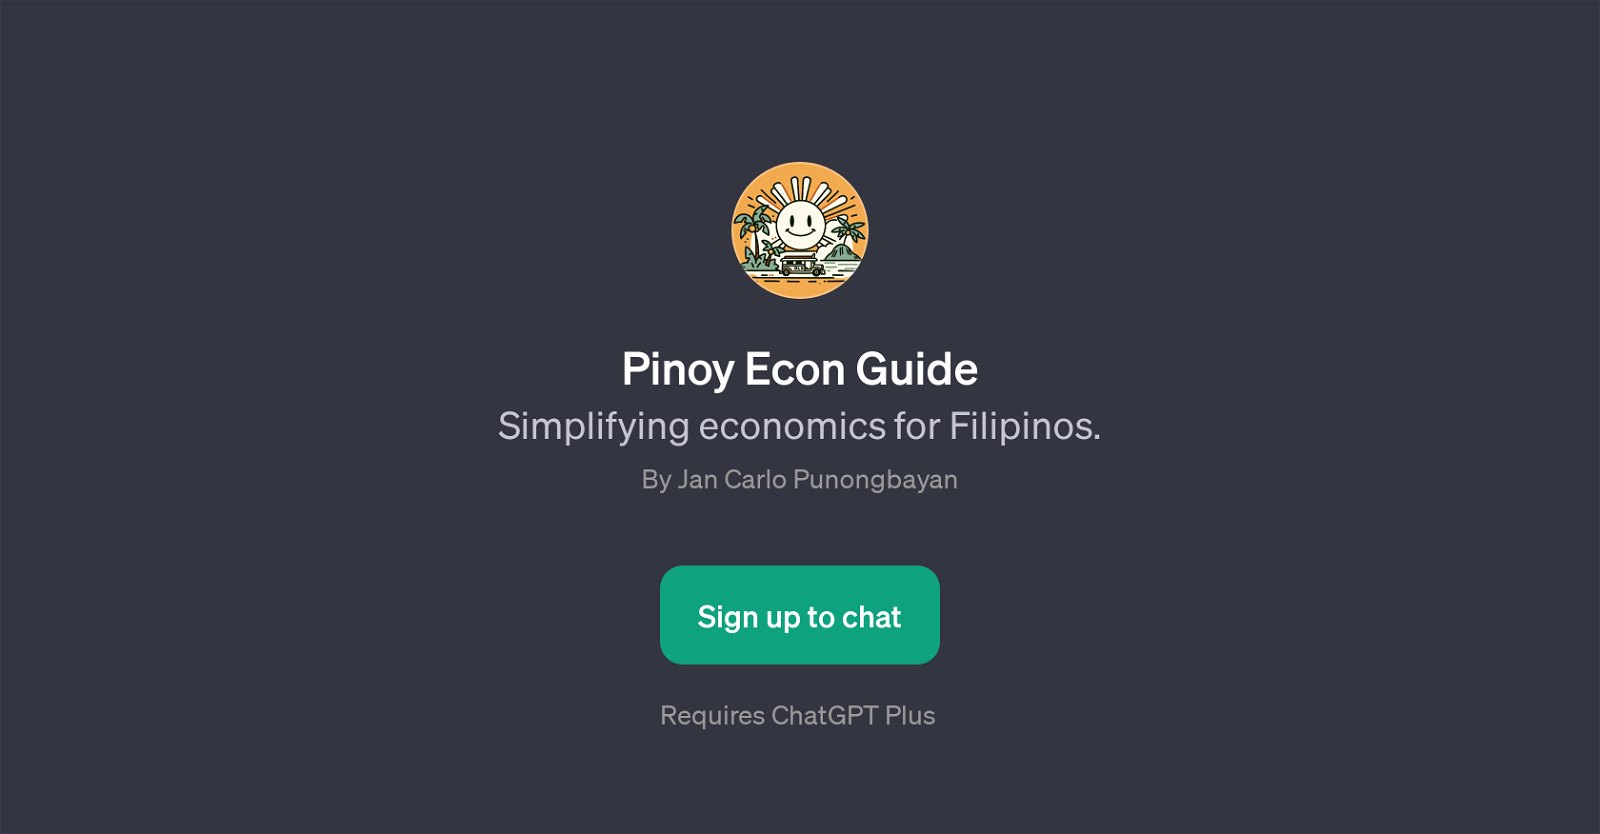 Pinoy Econ Guide website